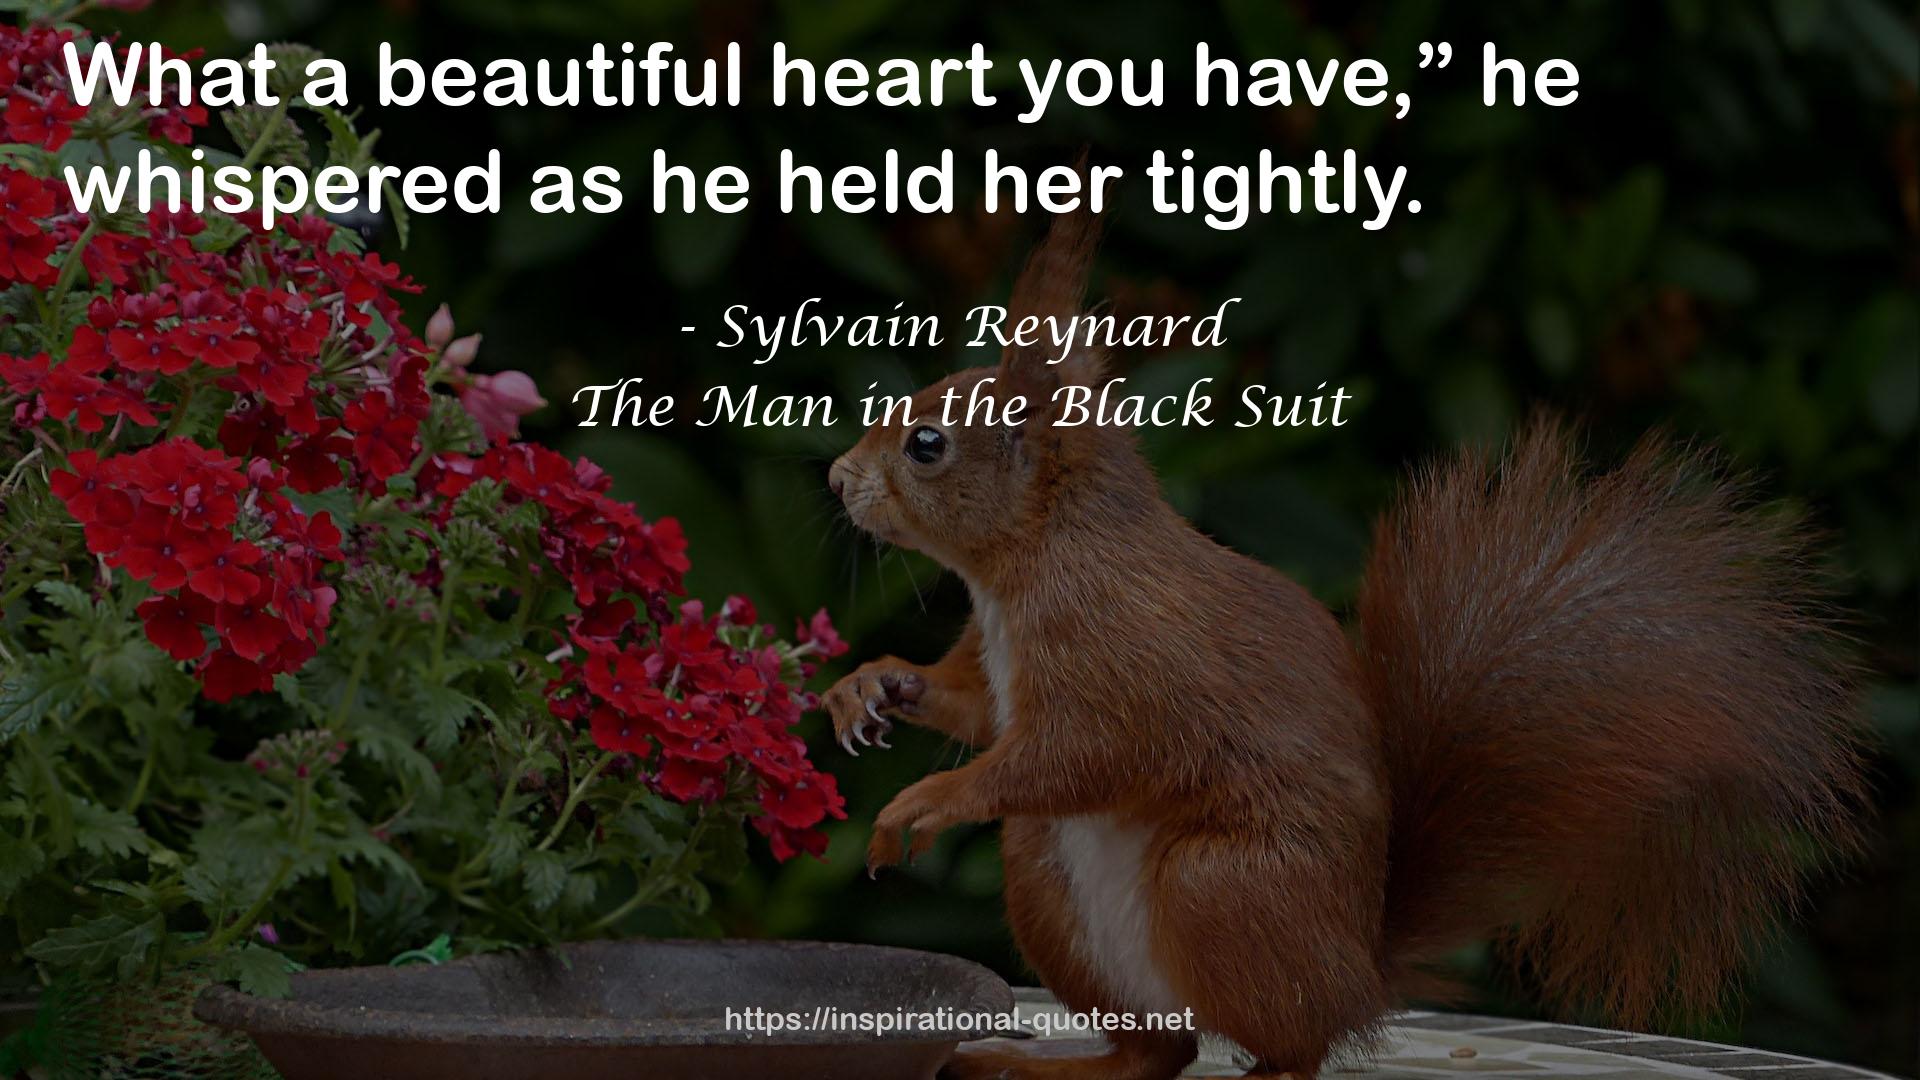 The Man in the Black Suit QUOTES